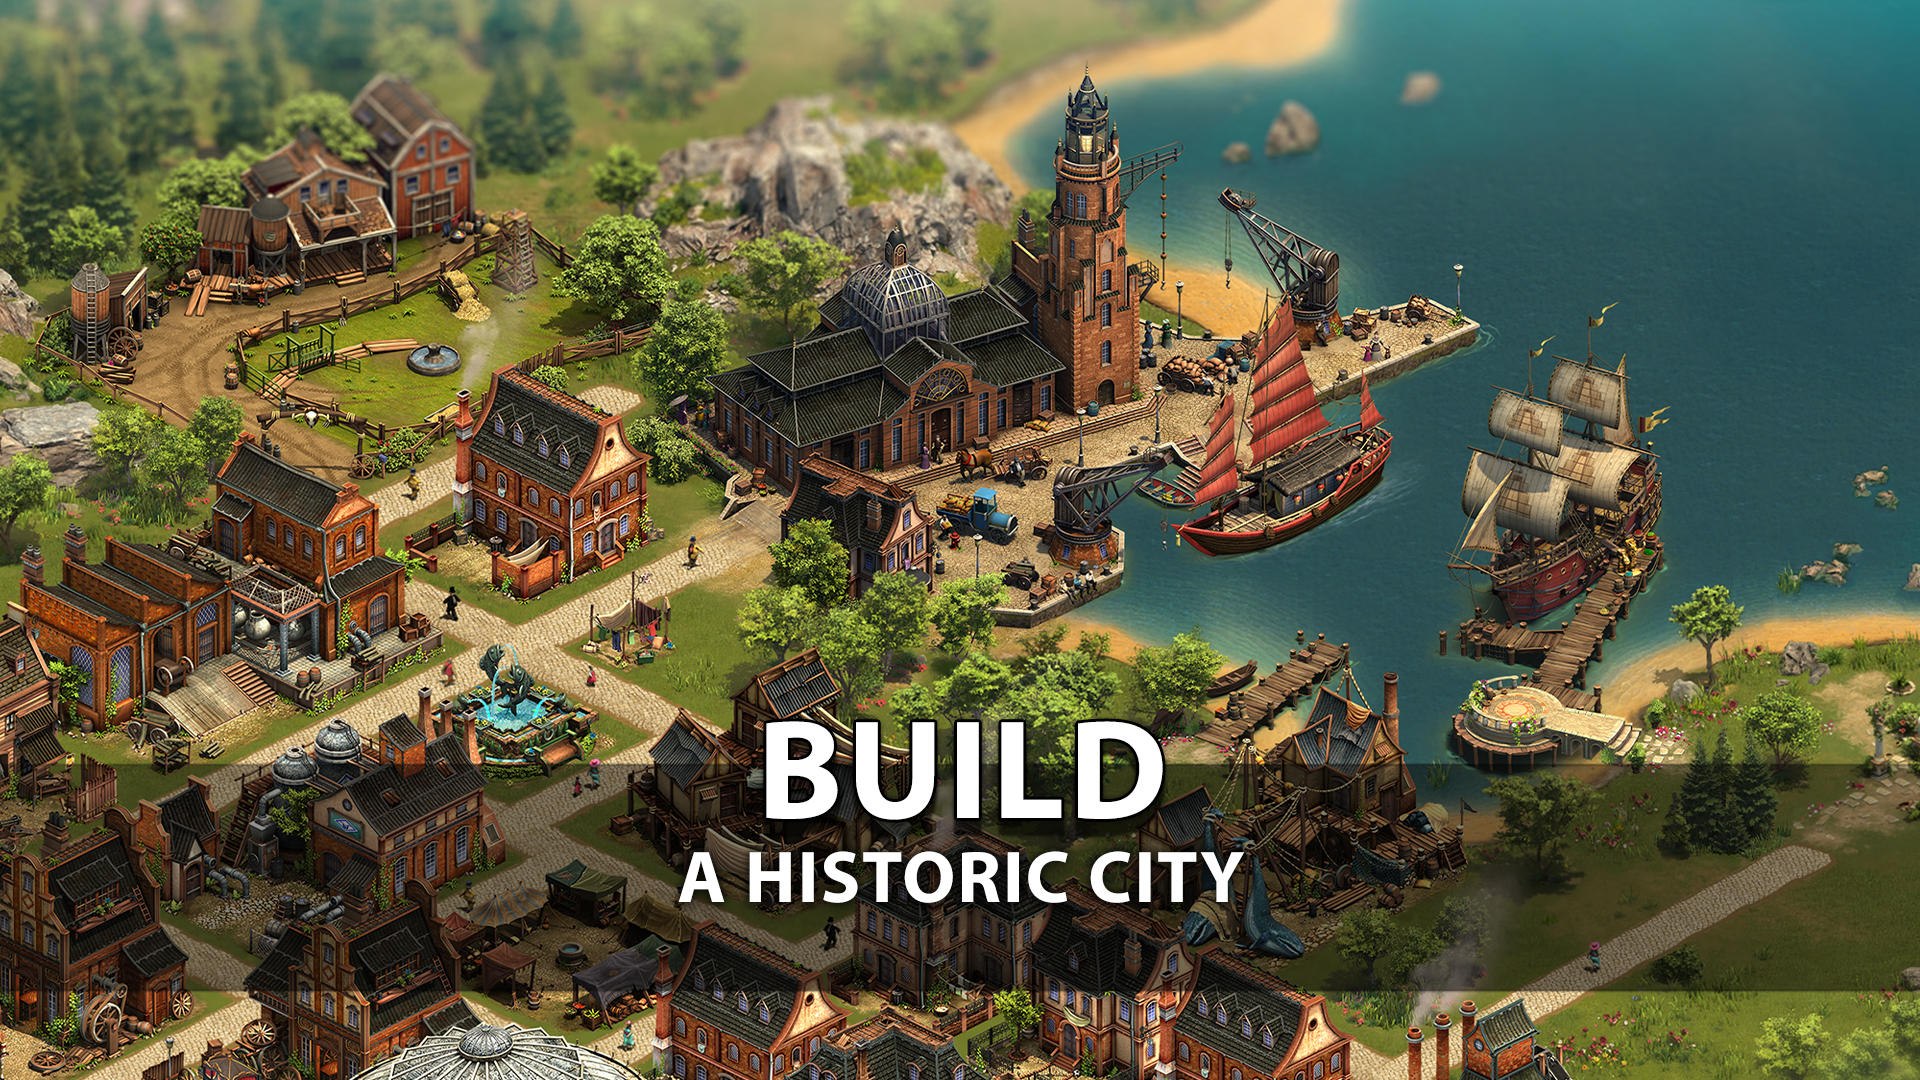 Screenshot 1 of Forge of Empires: Build a City 1.282.20